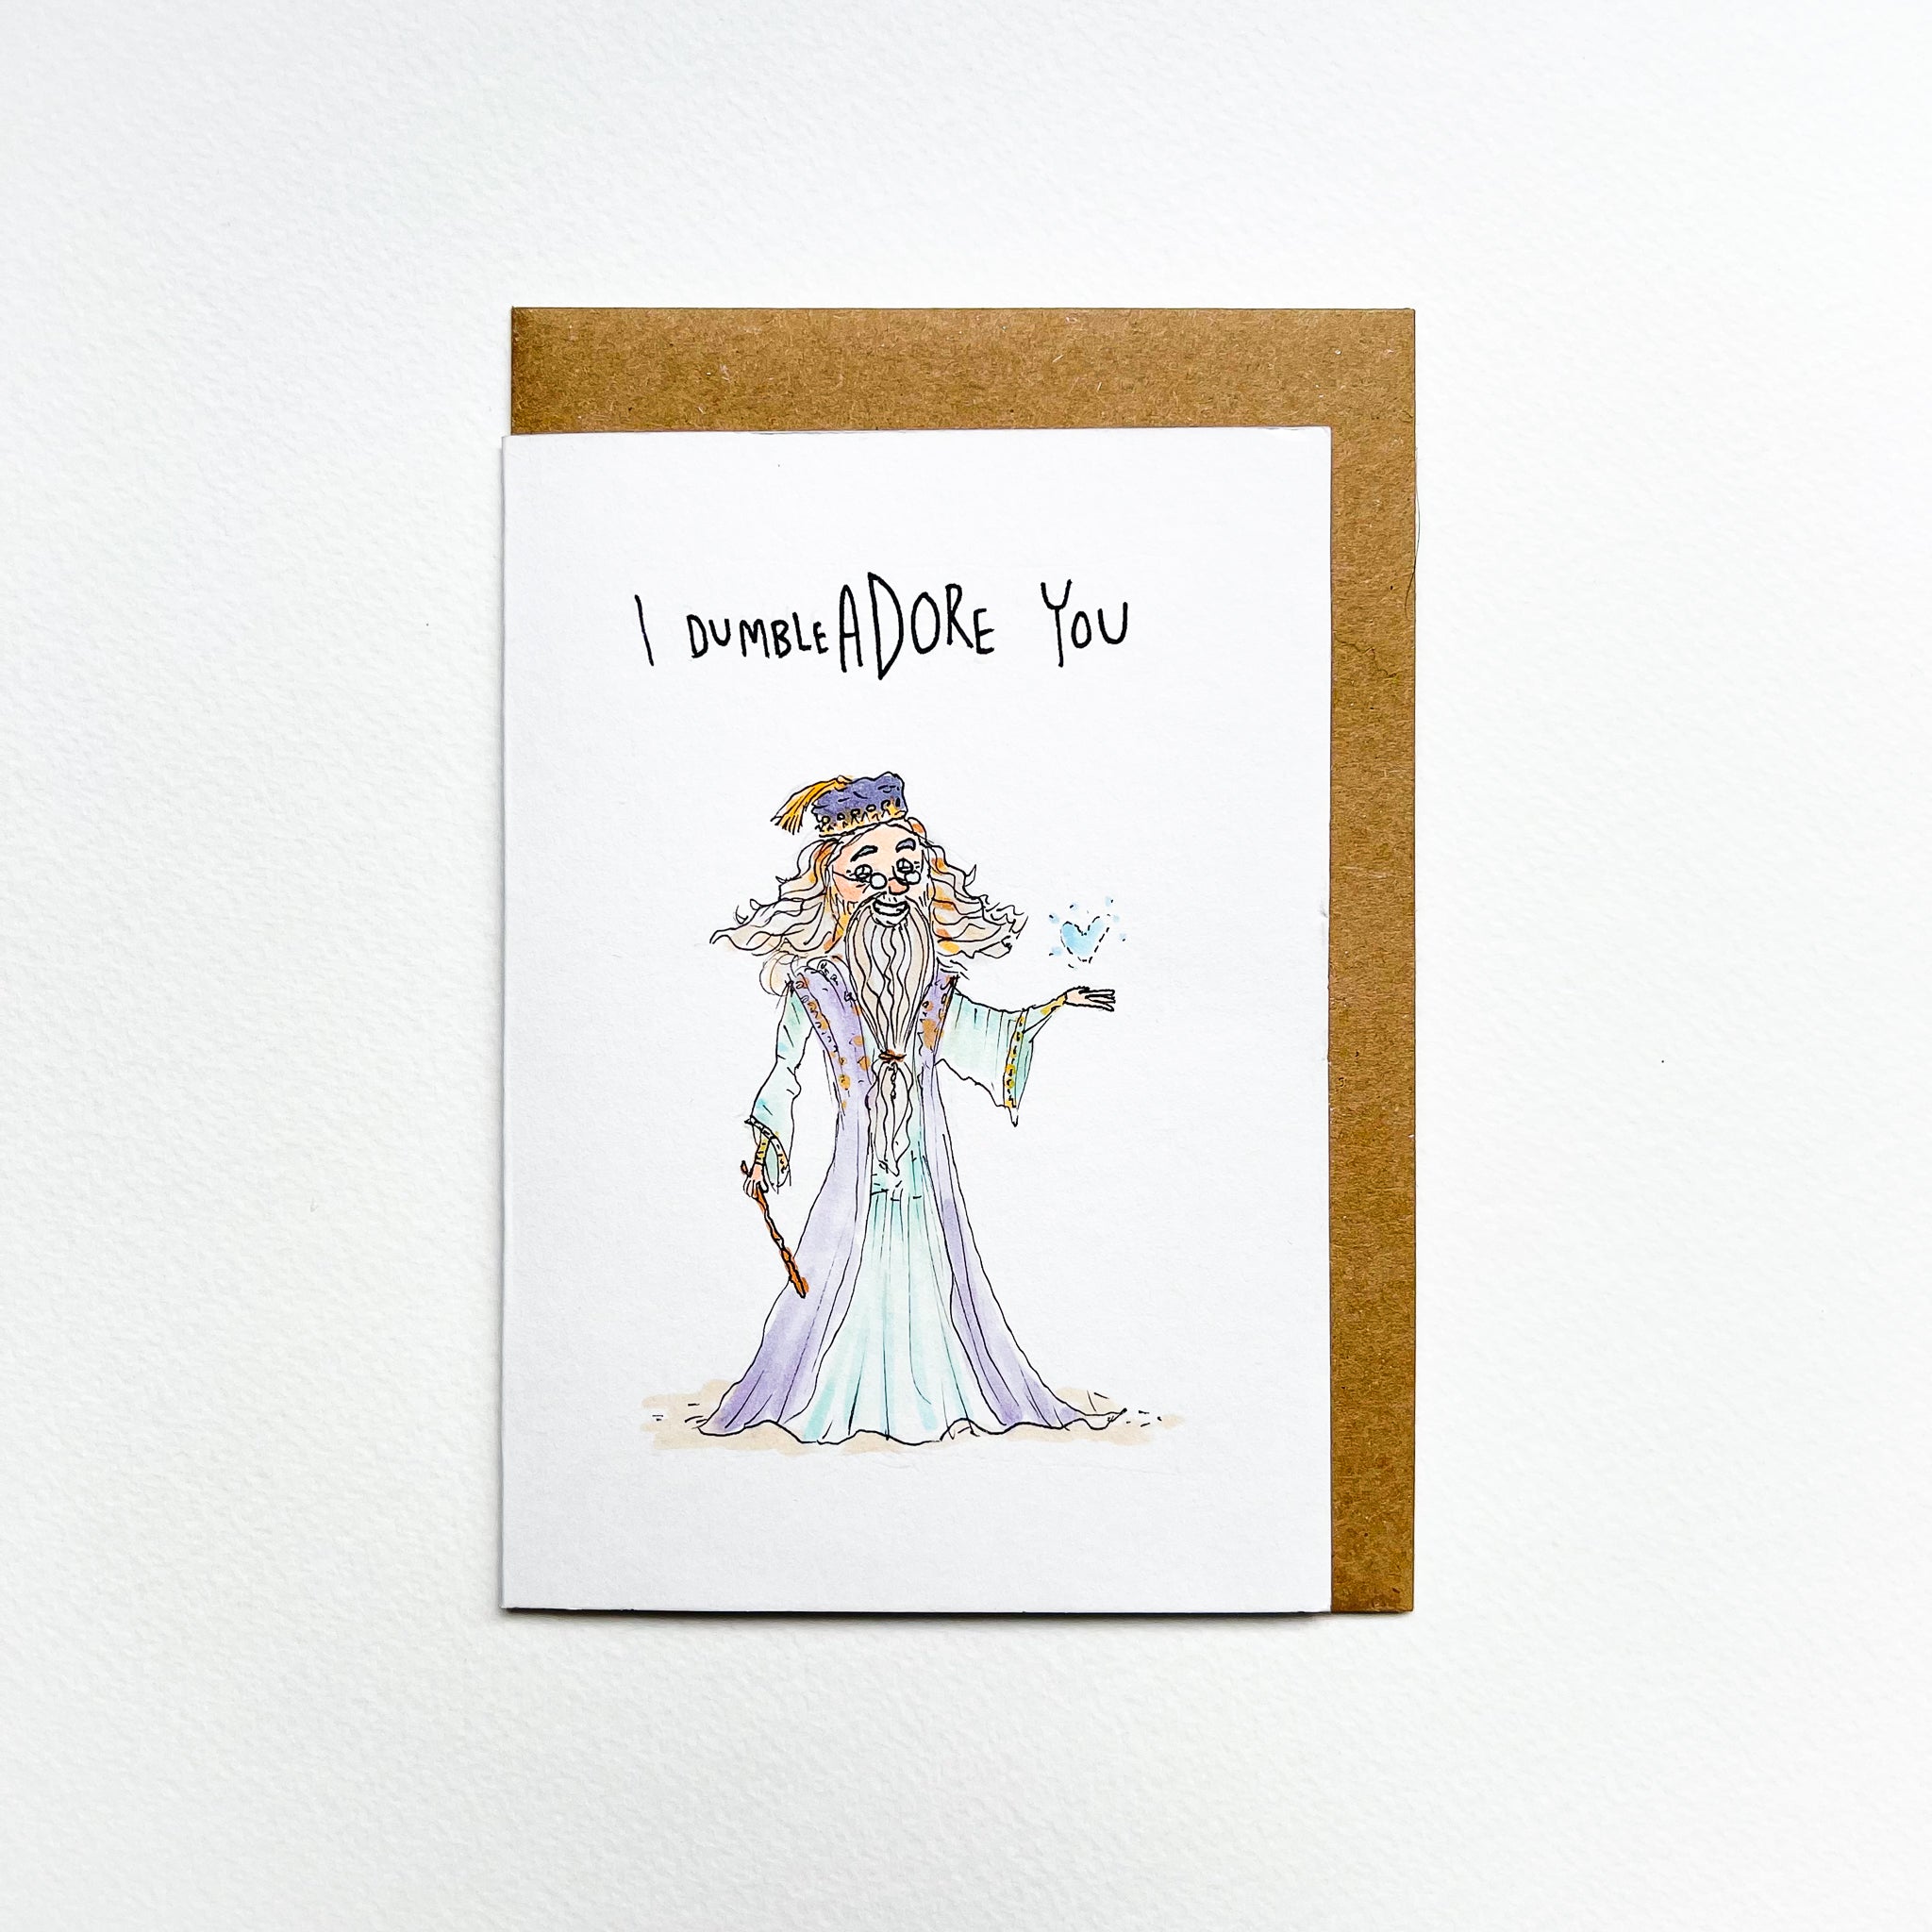 I Dumble-Adore You - Well Drawn